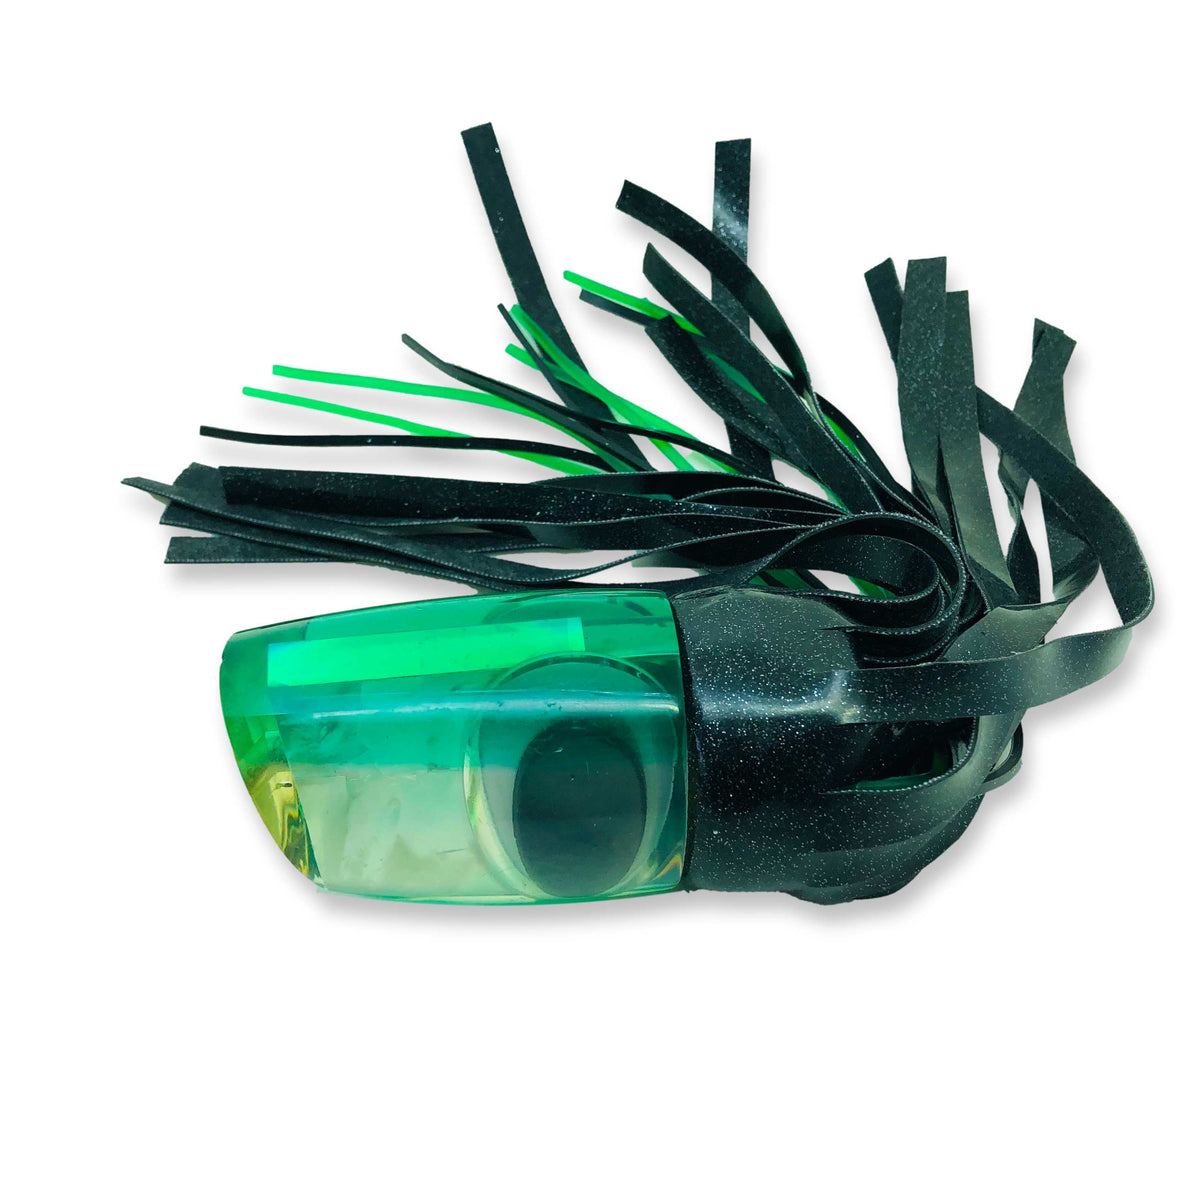 Marlin Magic Lures-Great Deal! Marlin Magic Extra Large 14&quot; Green Ruckus Skirted in Vinyl - Used-Used Lures